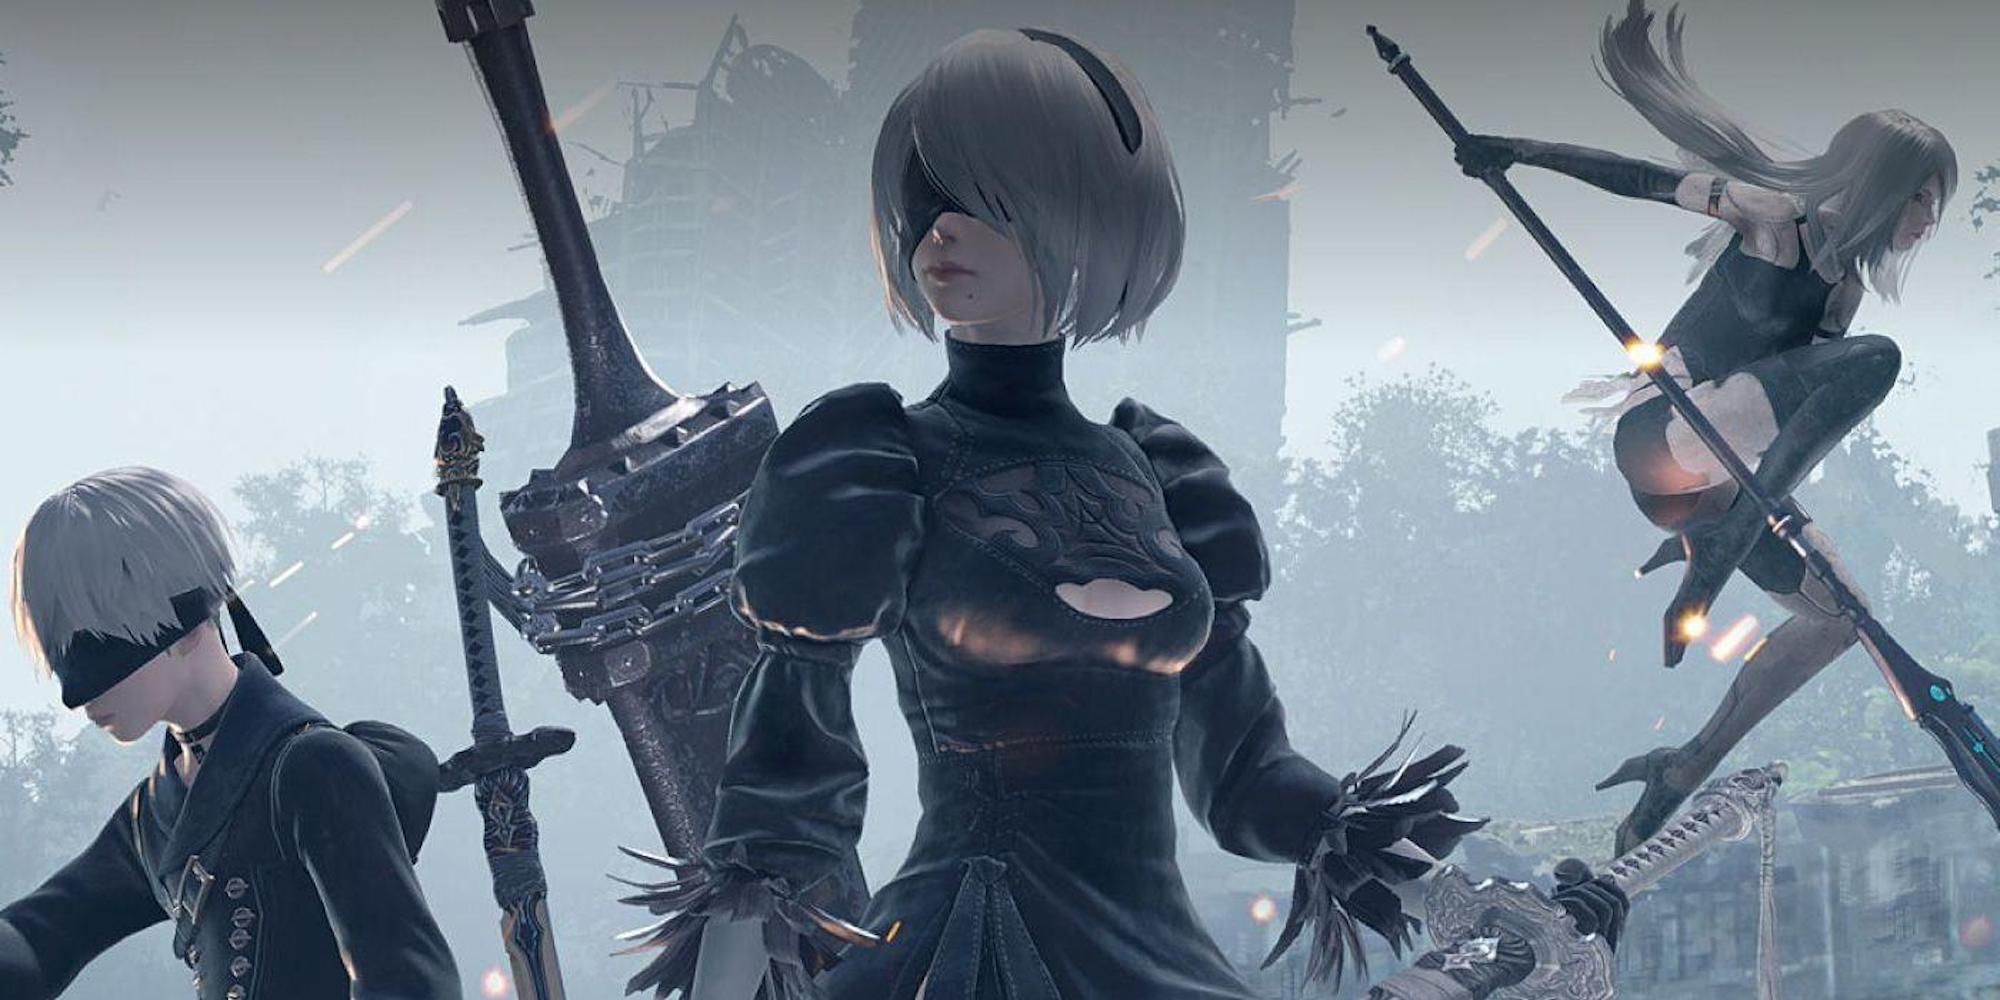 Promo art featuring the main cast from NieR: Automata